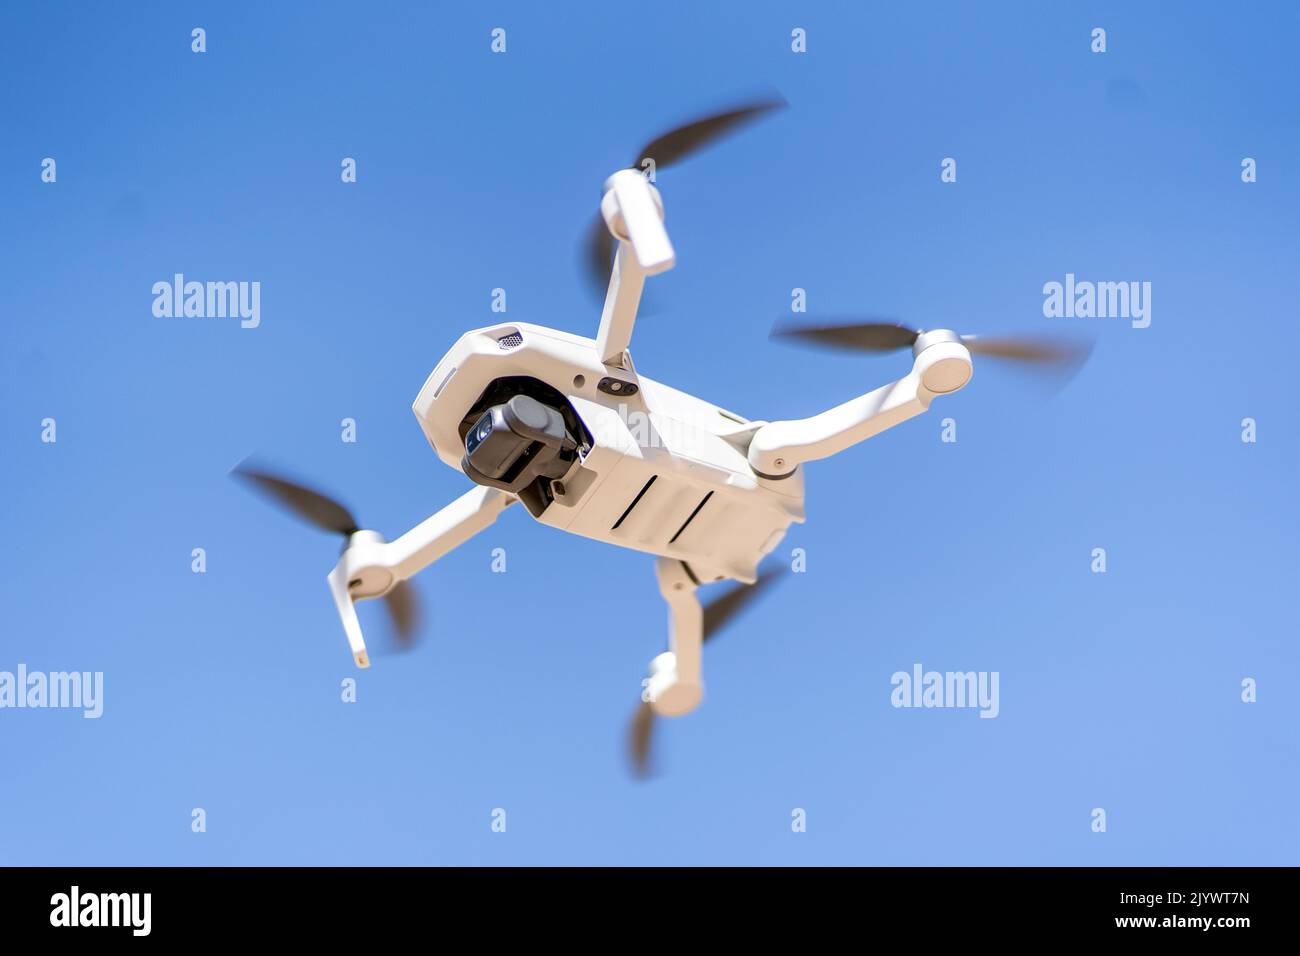 drone flying over the sky capturing images Stock Photo